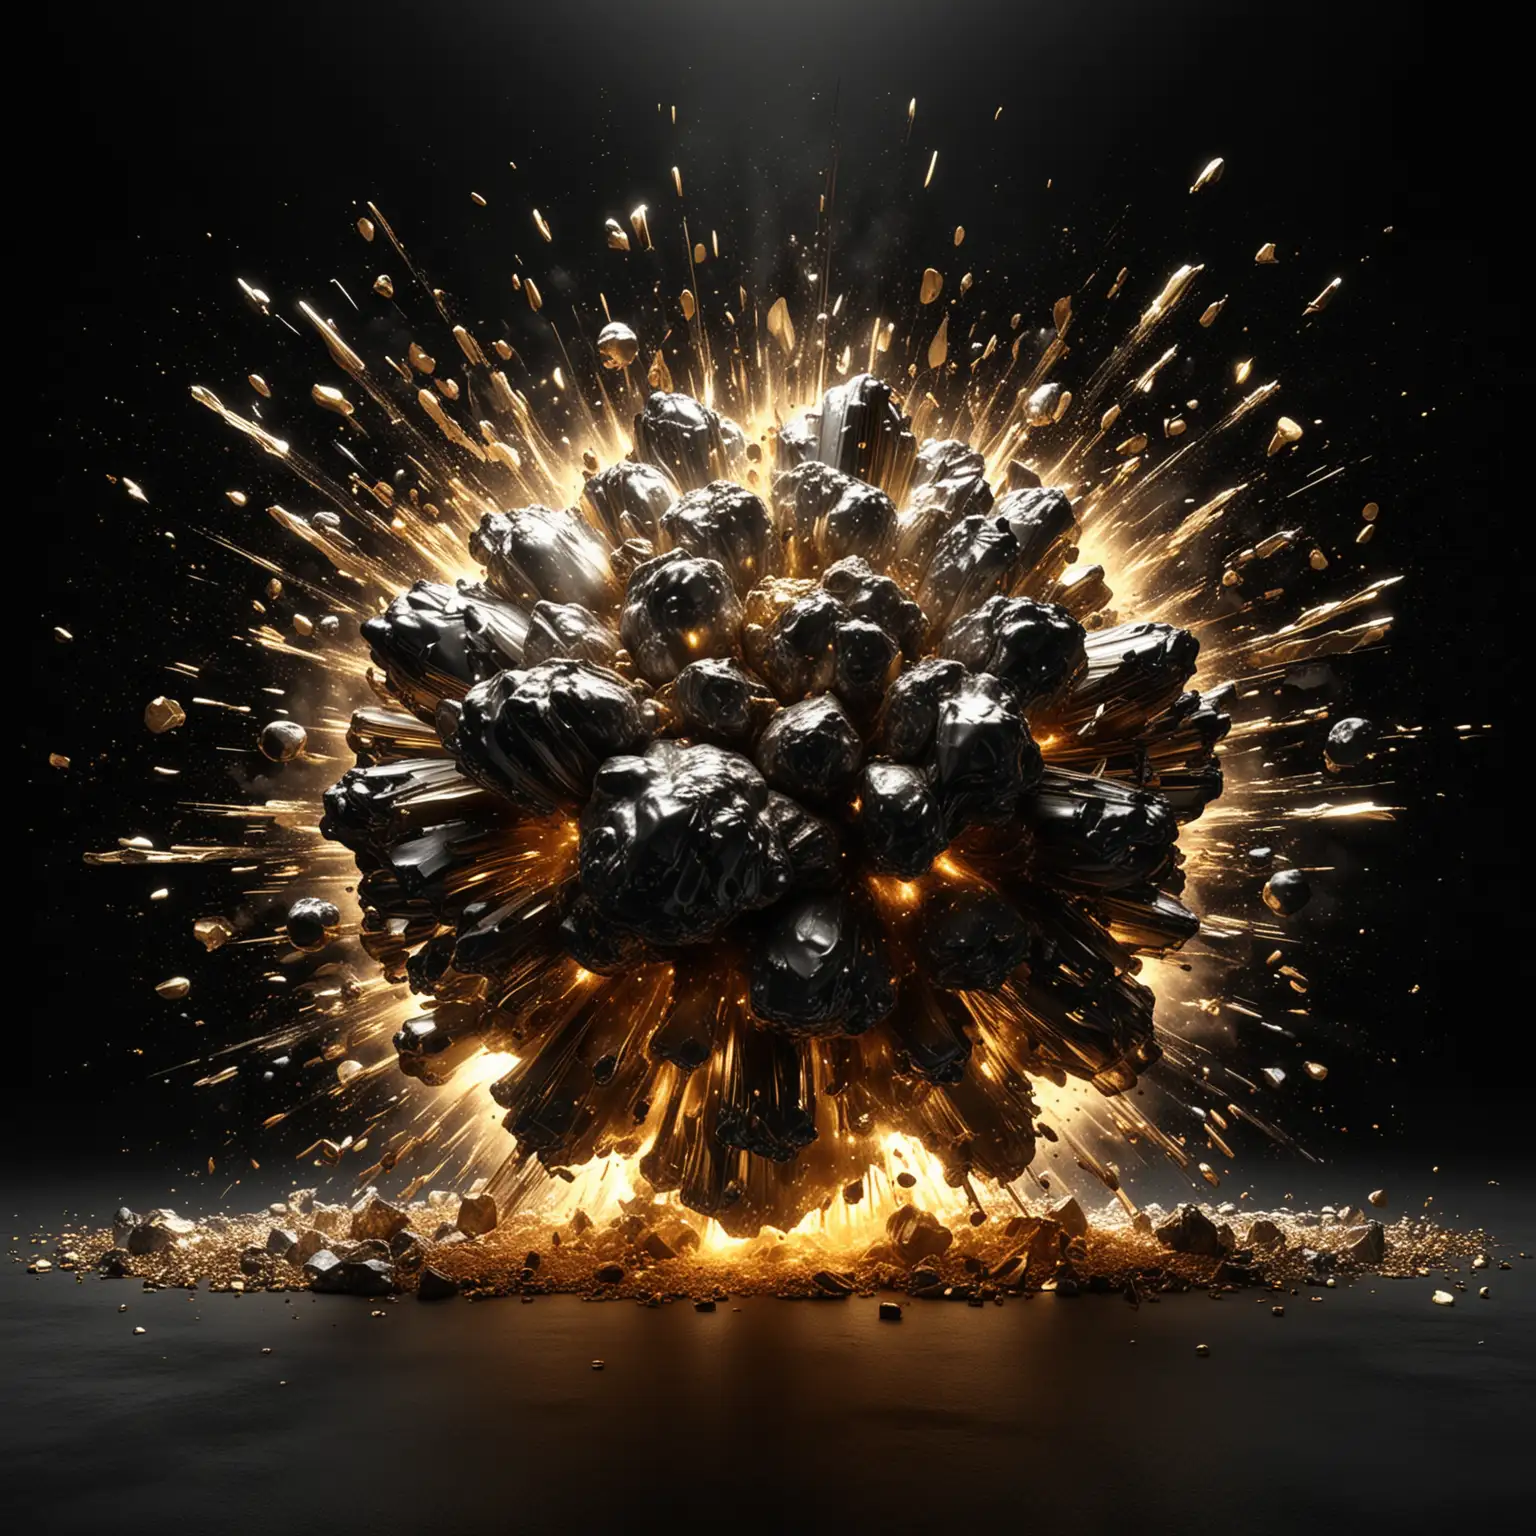 Explosive Gold and Chrome Cinematic Lighting on Black Background